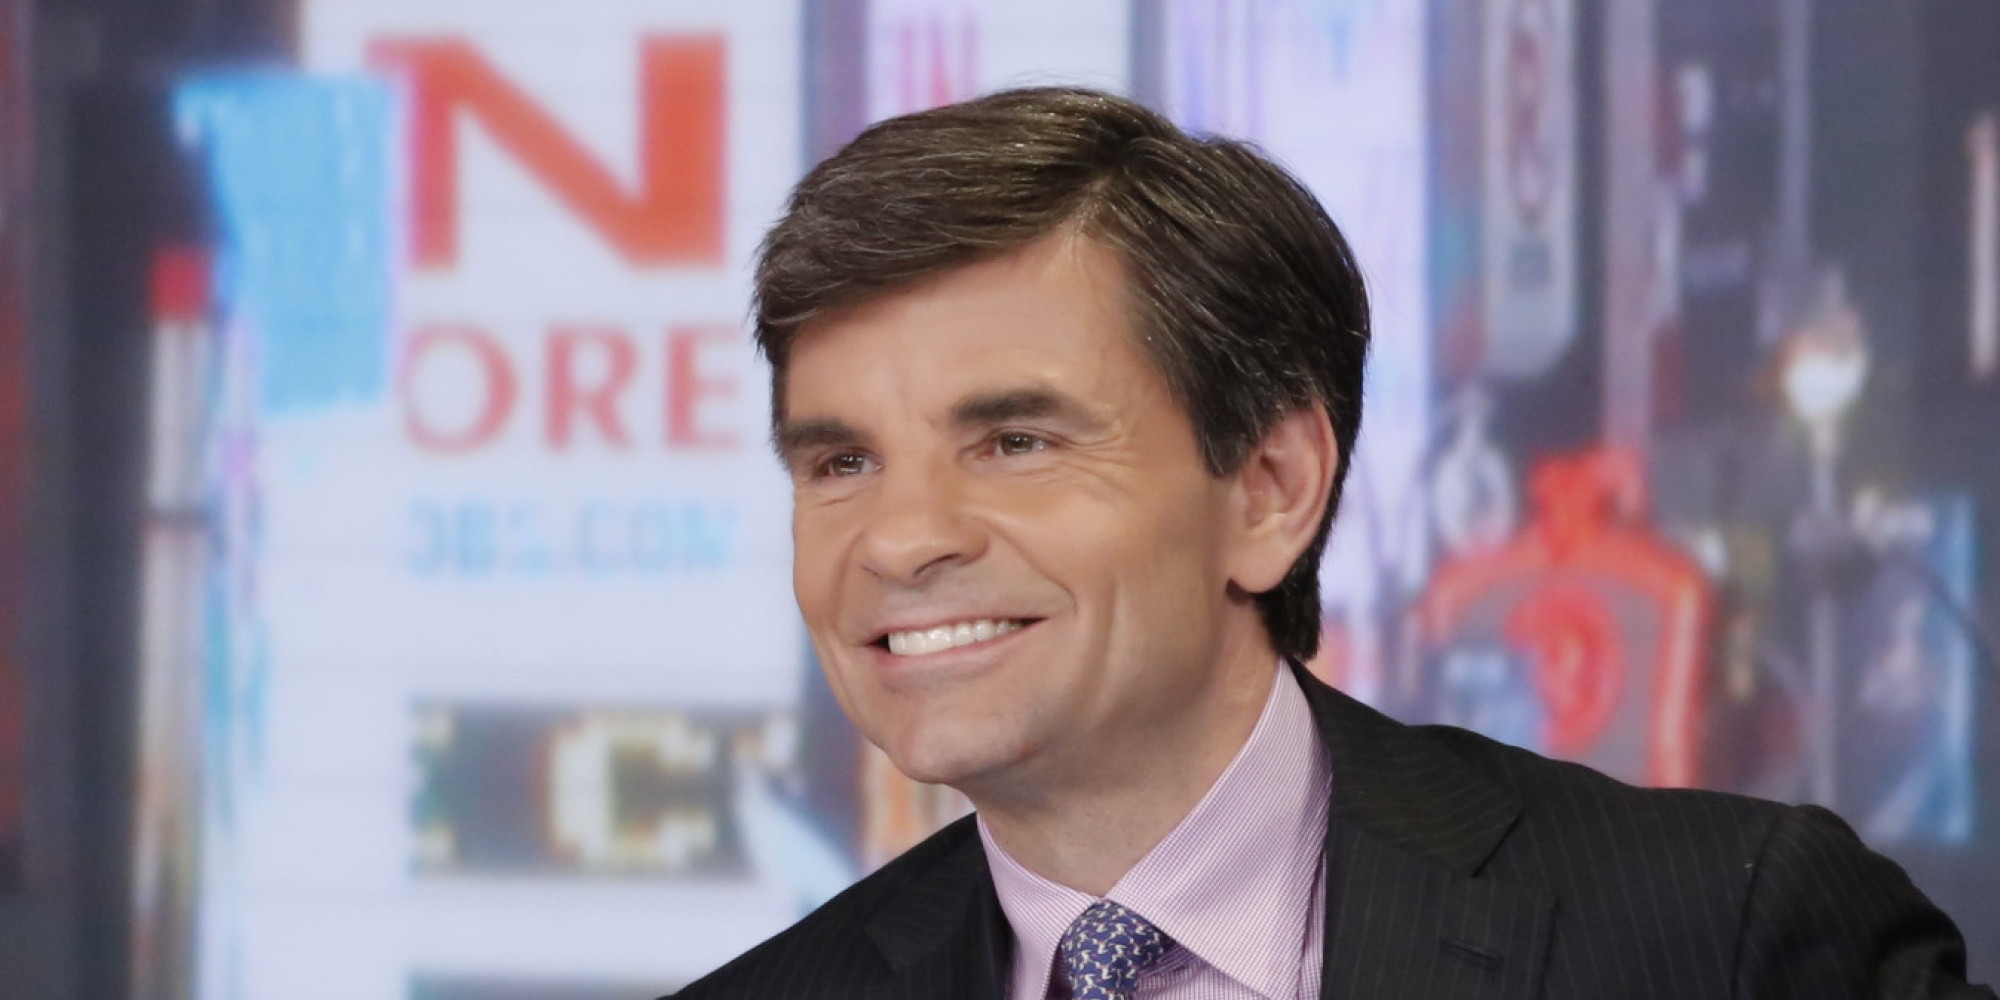 George Stephanopoulos Lands Coveted Vladimir Putin Interview | HuffPost